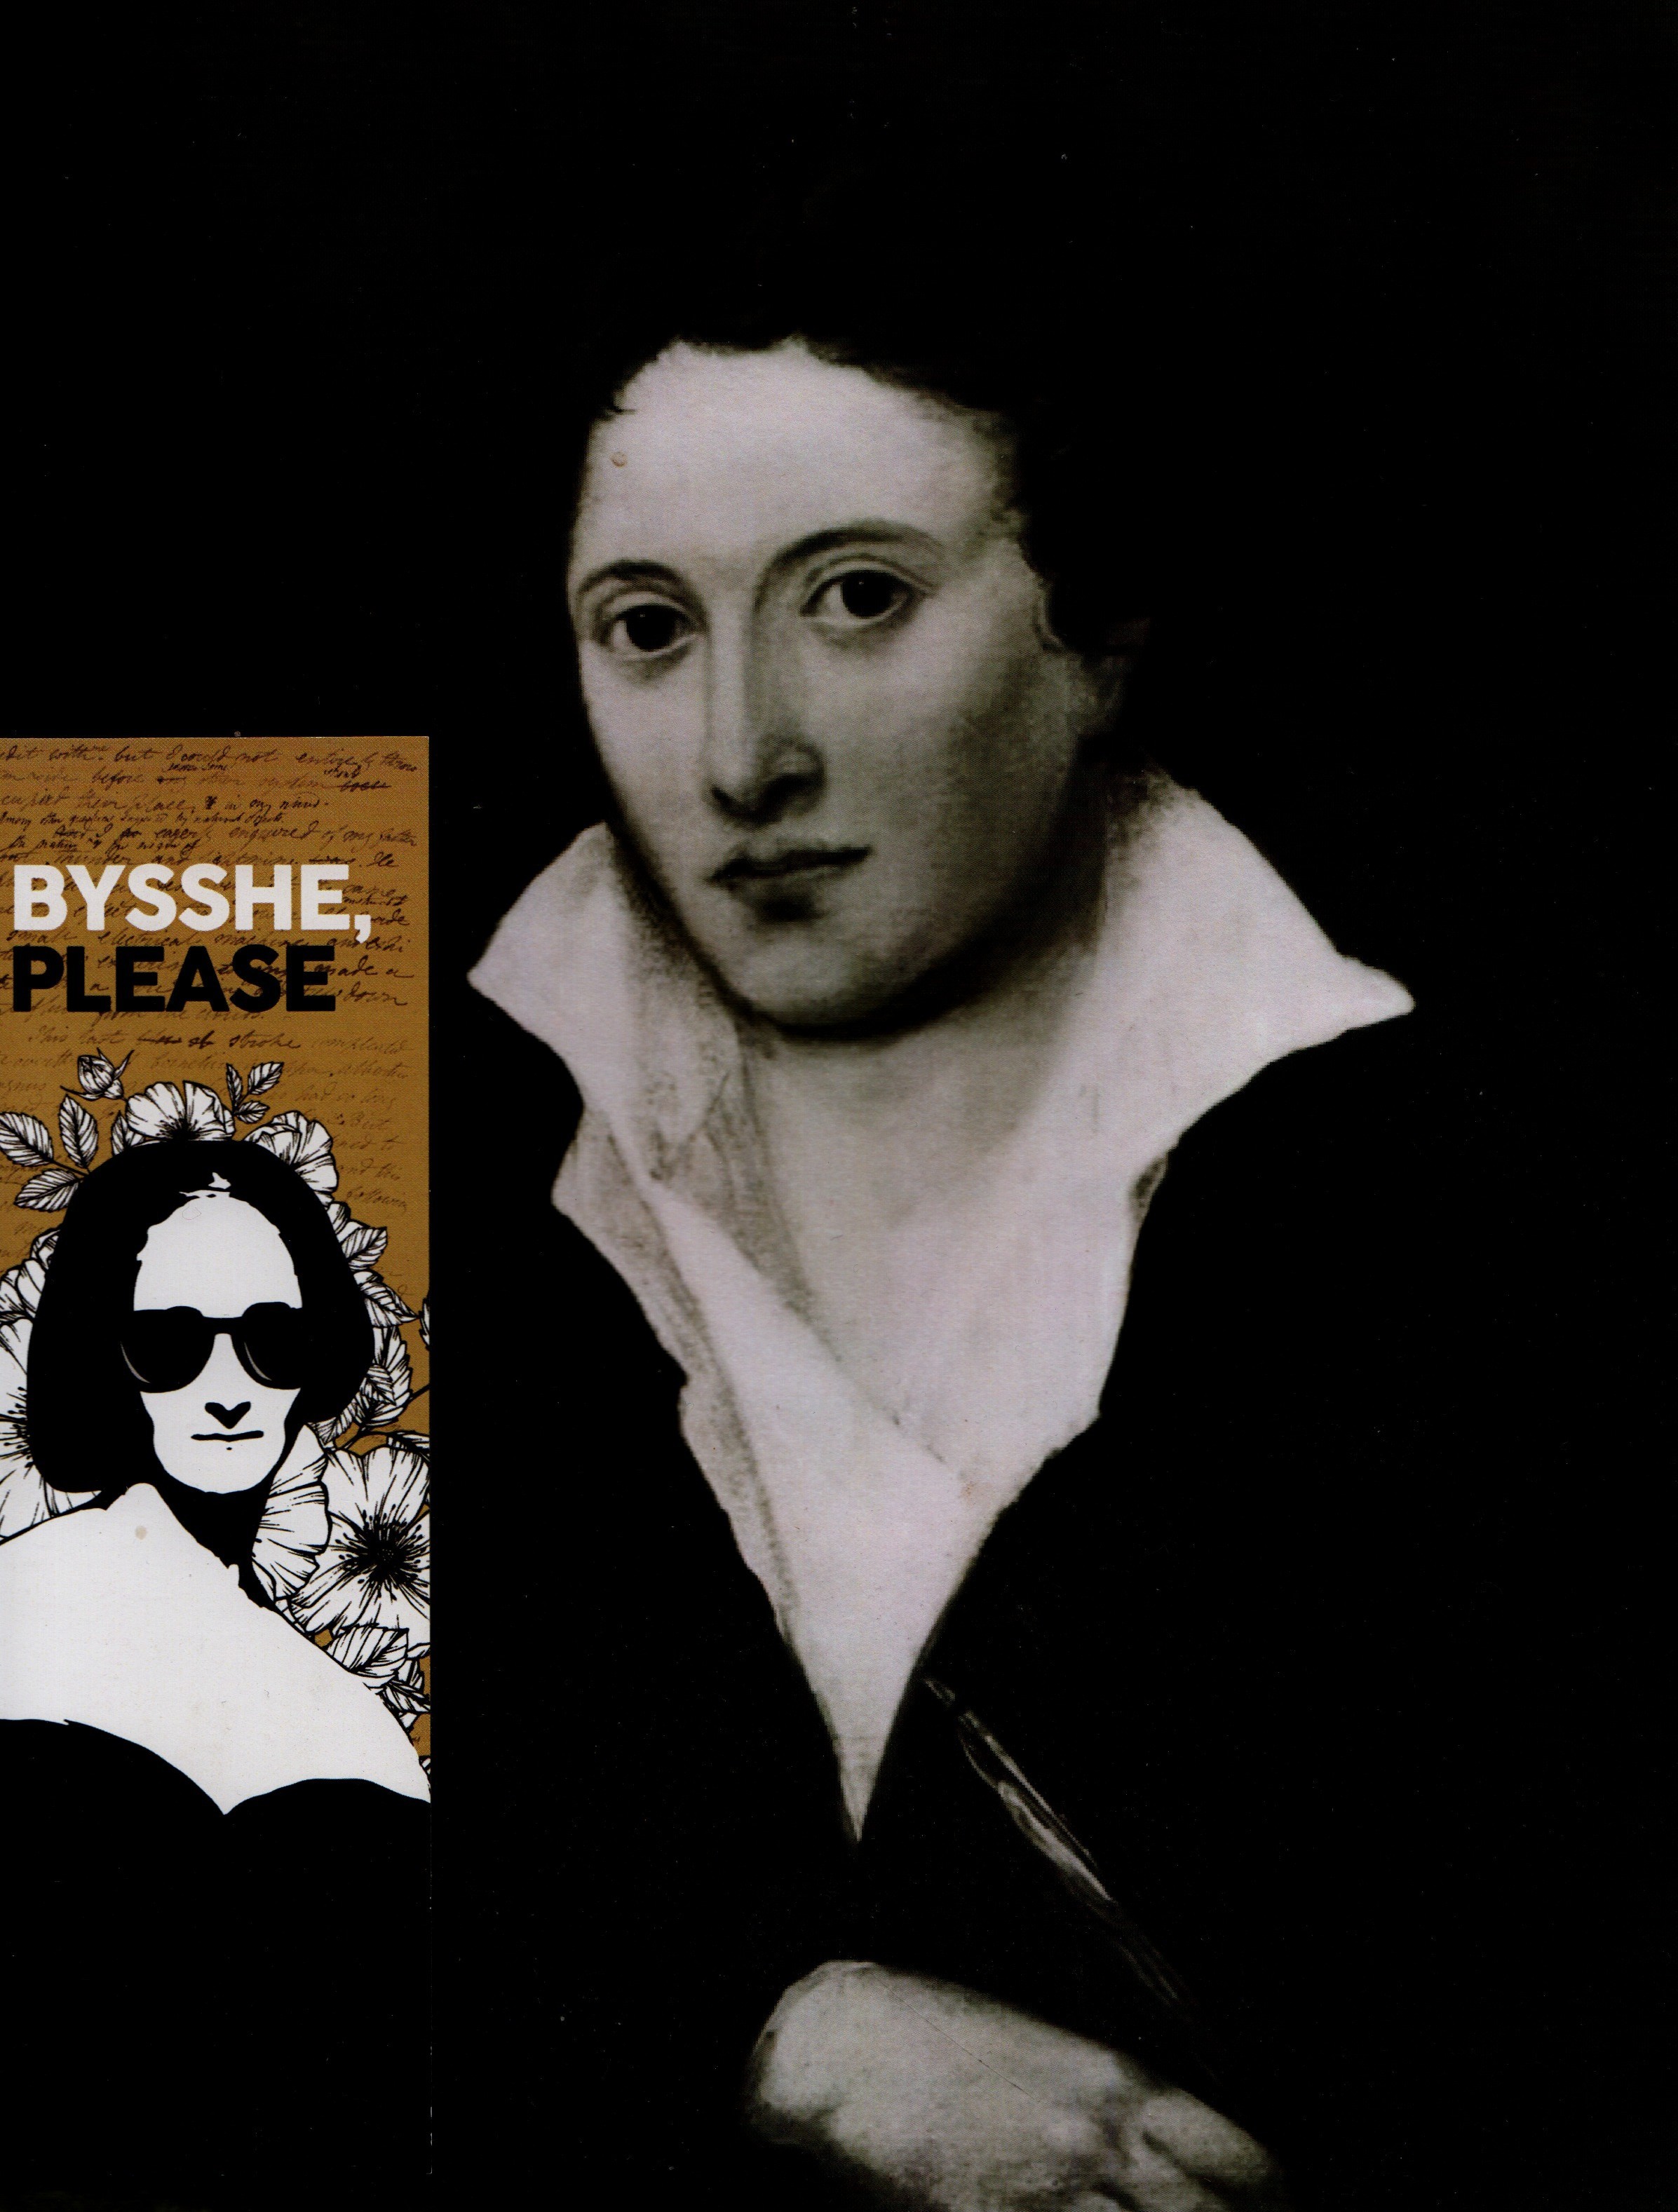 Mary Shelley at Nineteen, wife of poet Percy Bysshe Shelley